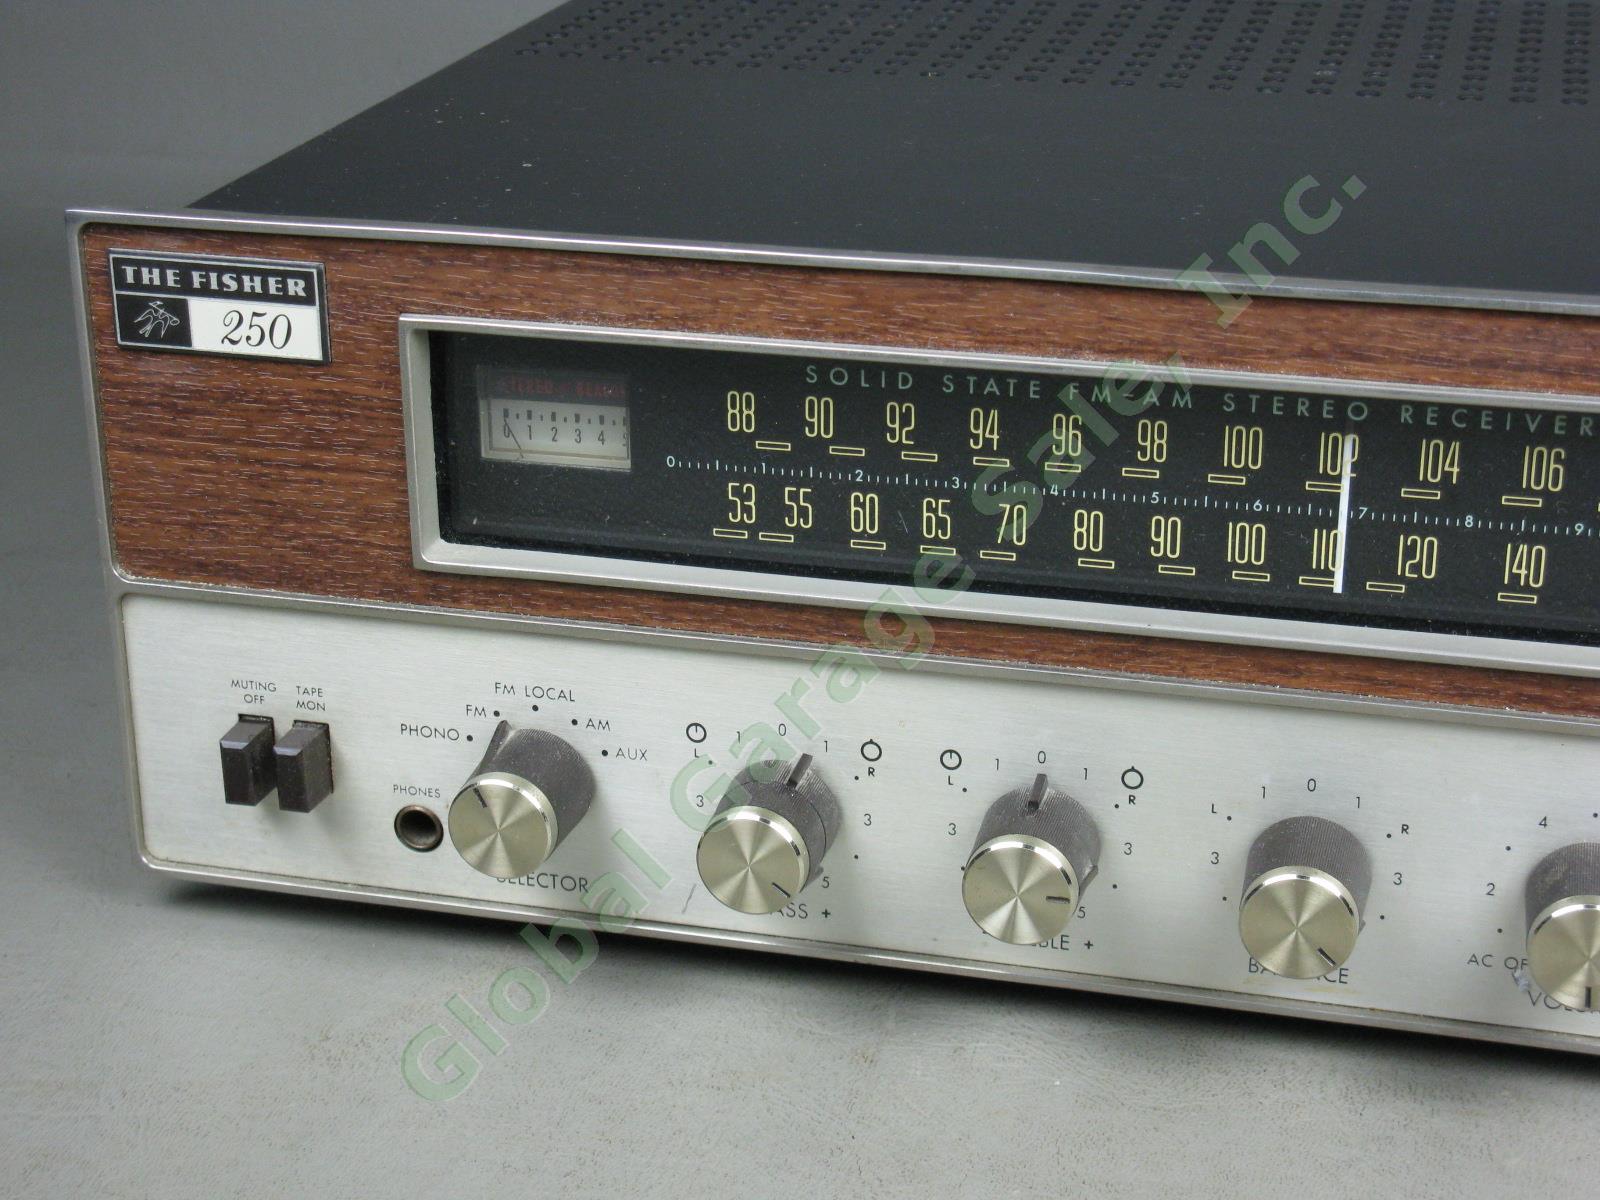 Vtg The Fisher 250-TX Tune-O-Matic AM/FM Stereo Receiver Stations Tested As-Is 1